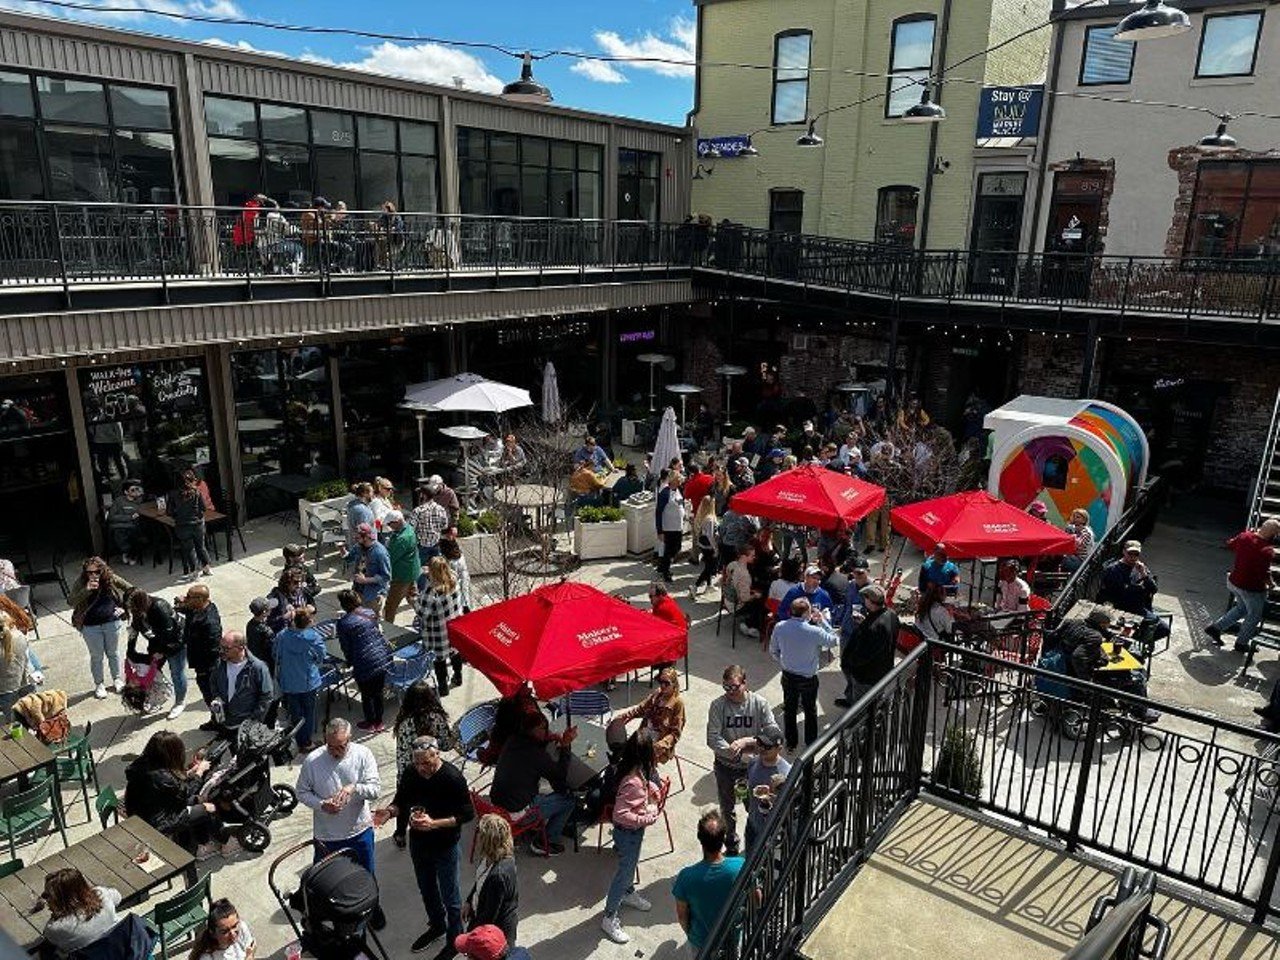 NULU Marketplace
823 E. Market St. 
Shopping and Dining in a cozy central courtyard. Photo via  NULU Marketplace 